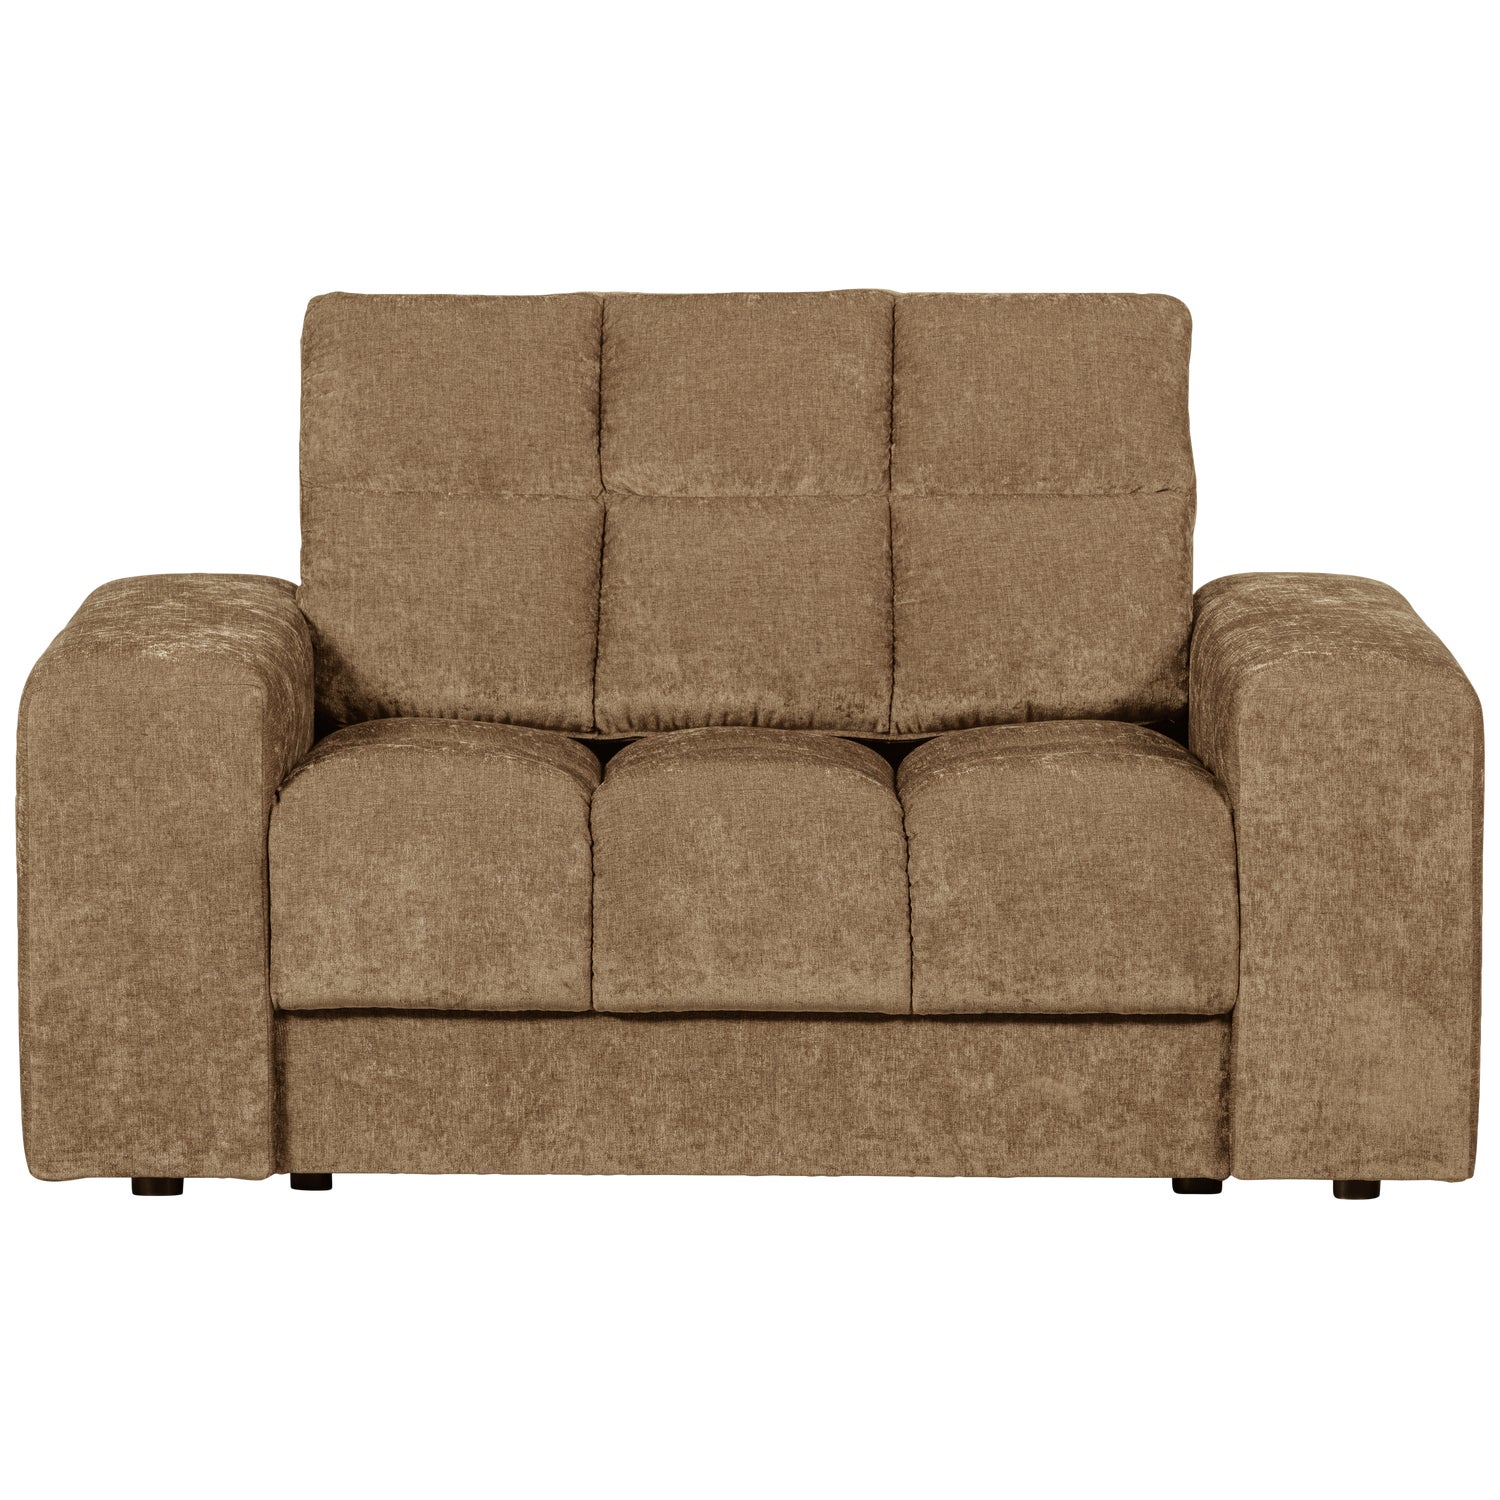 379006-Z-01_VS_WE_Second_date_loveseat_vintage_zand.png?auto=webp&format=png&width=1500&height=1500